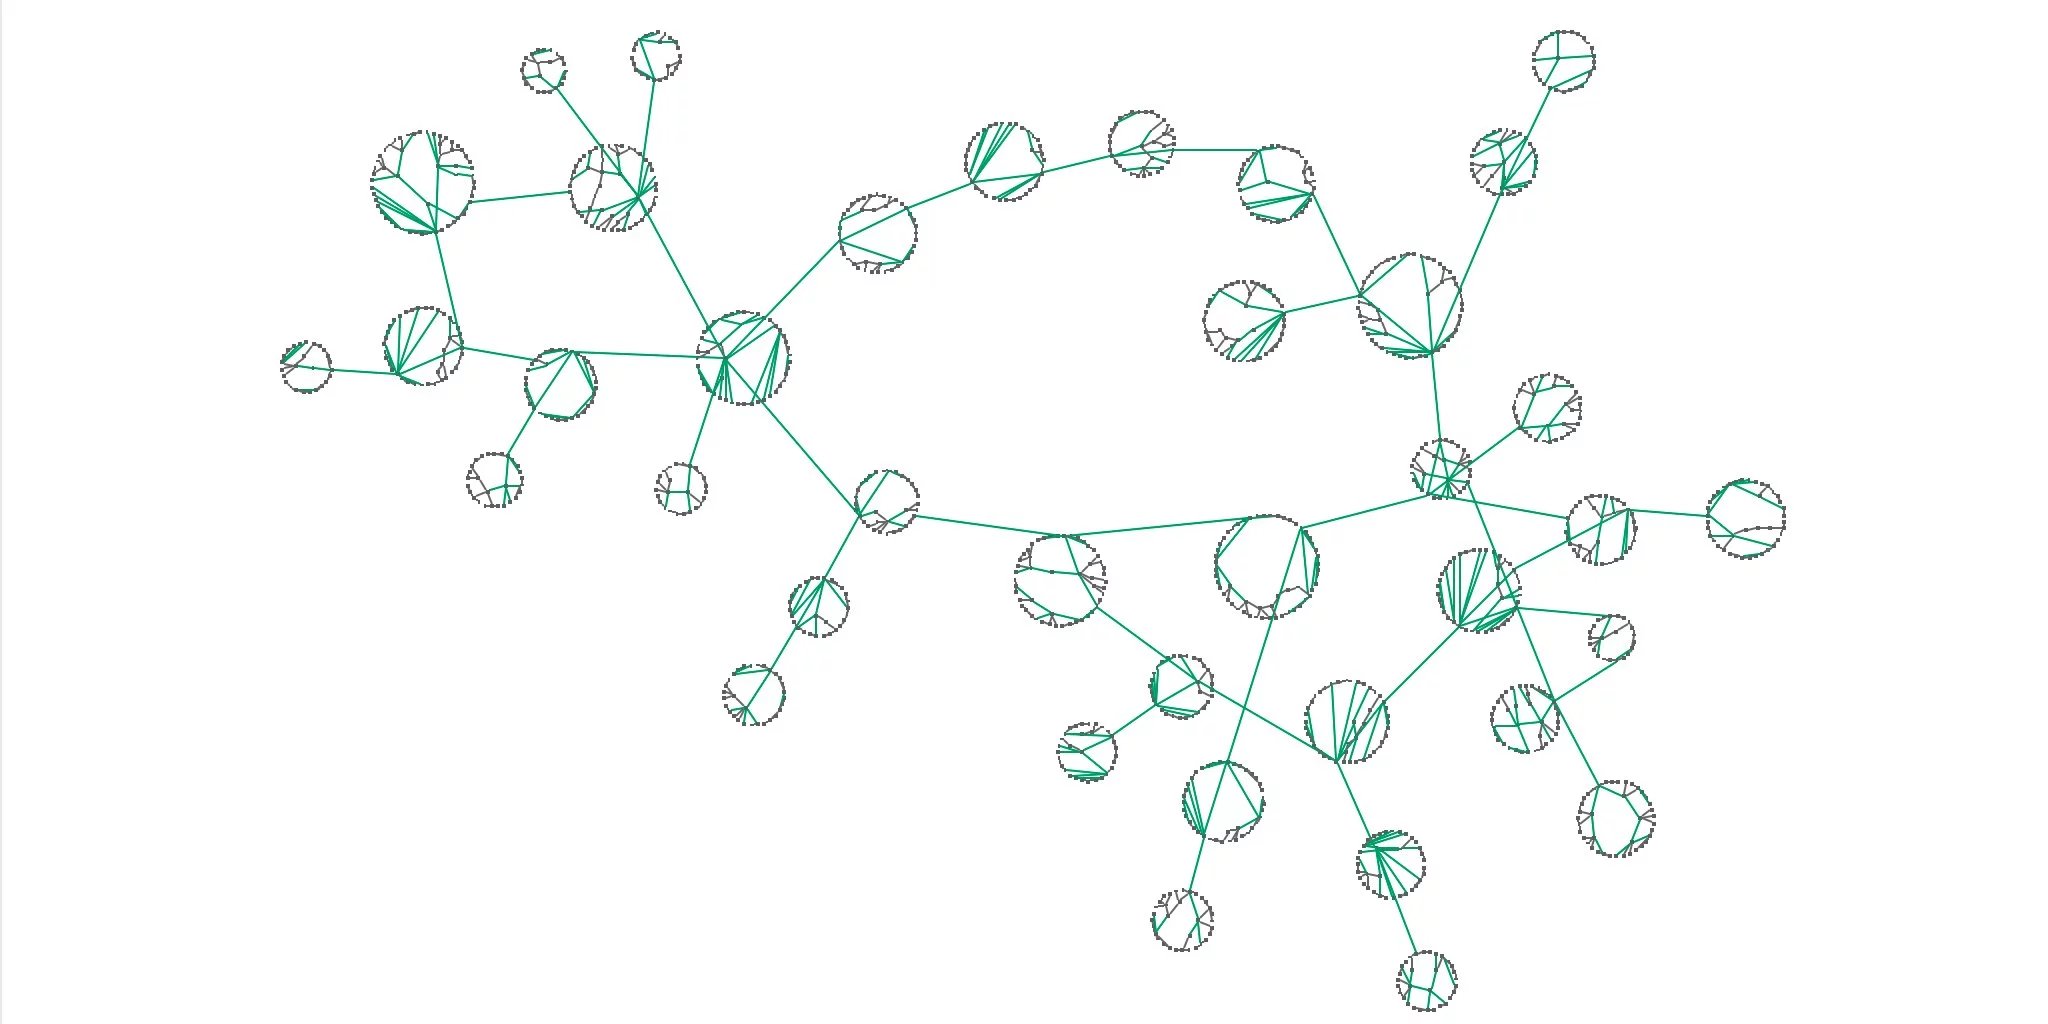 A large graph visualization that highlights connections and relationships between data points